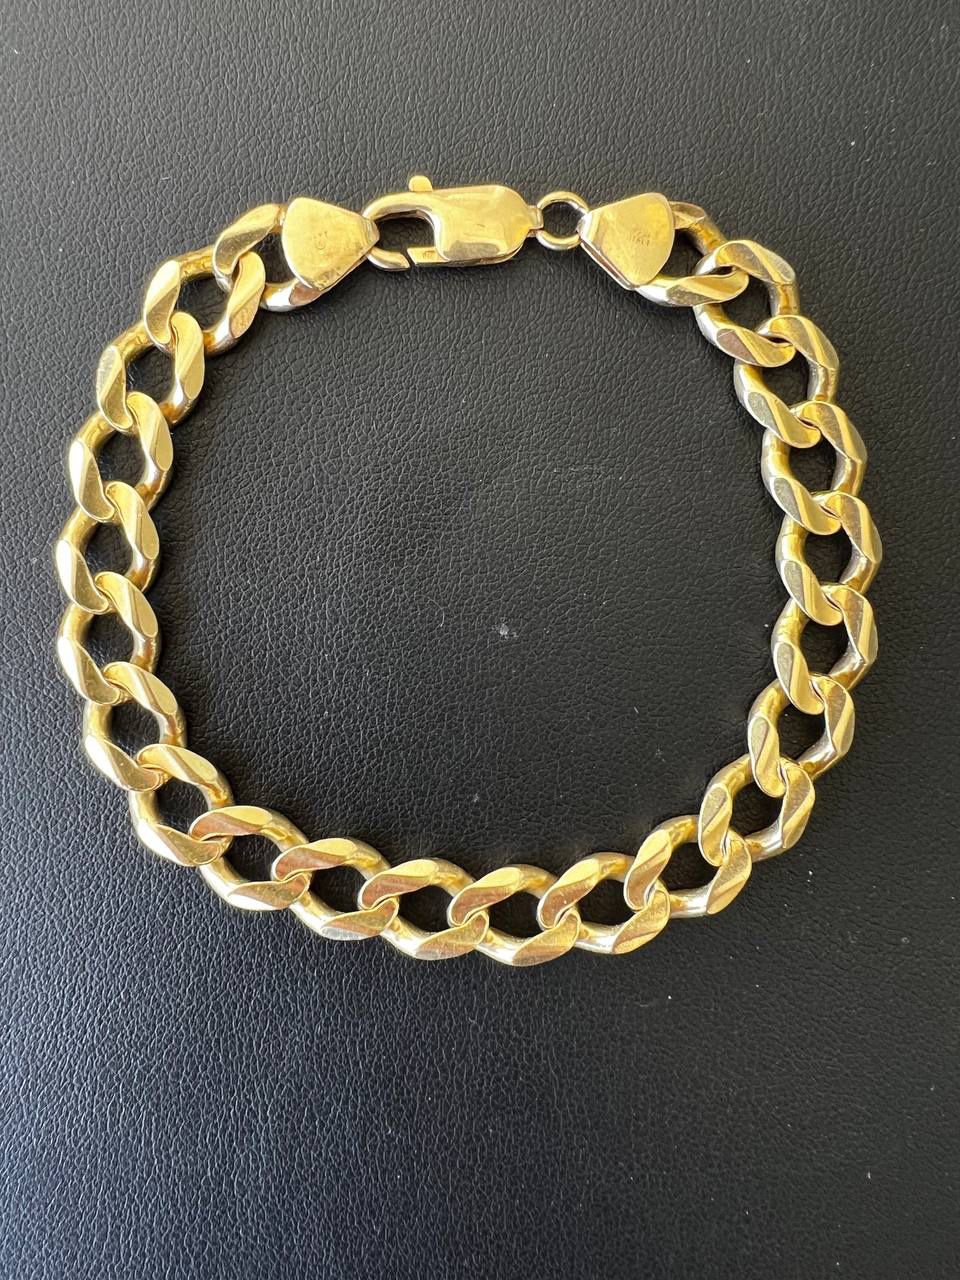 14k yellow gold solid curb bracelet 8 inch